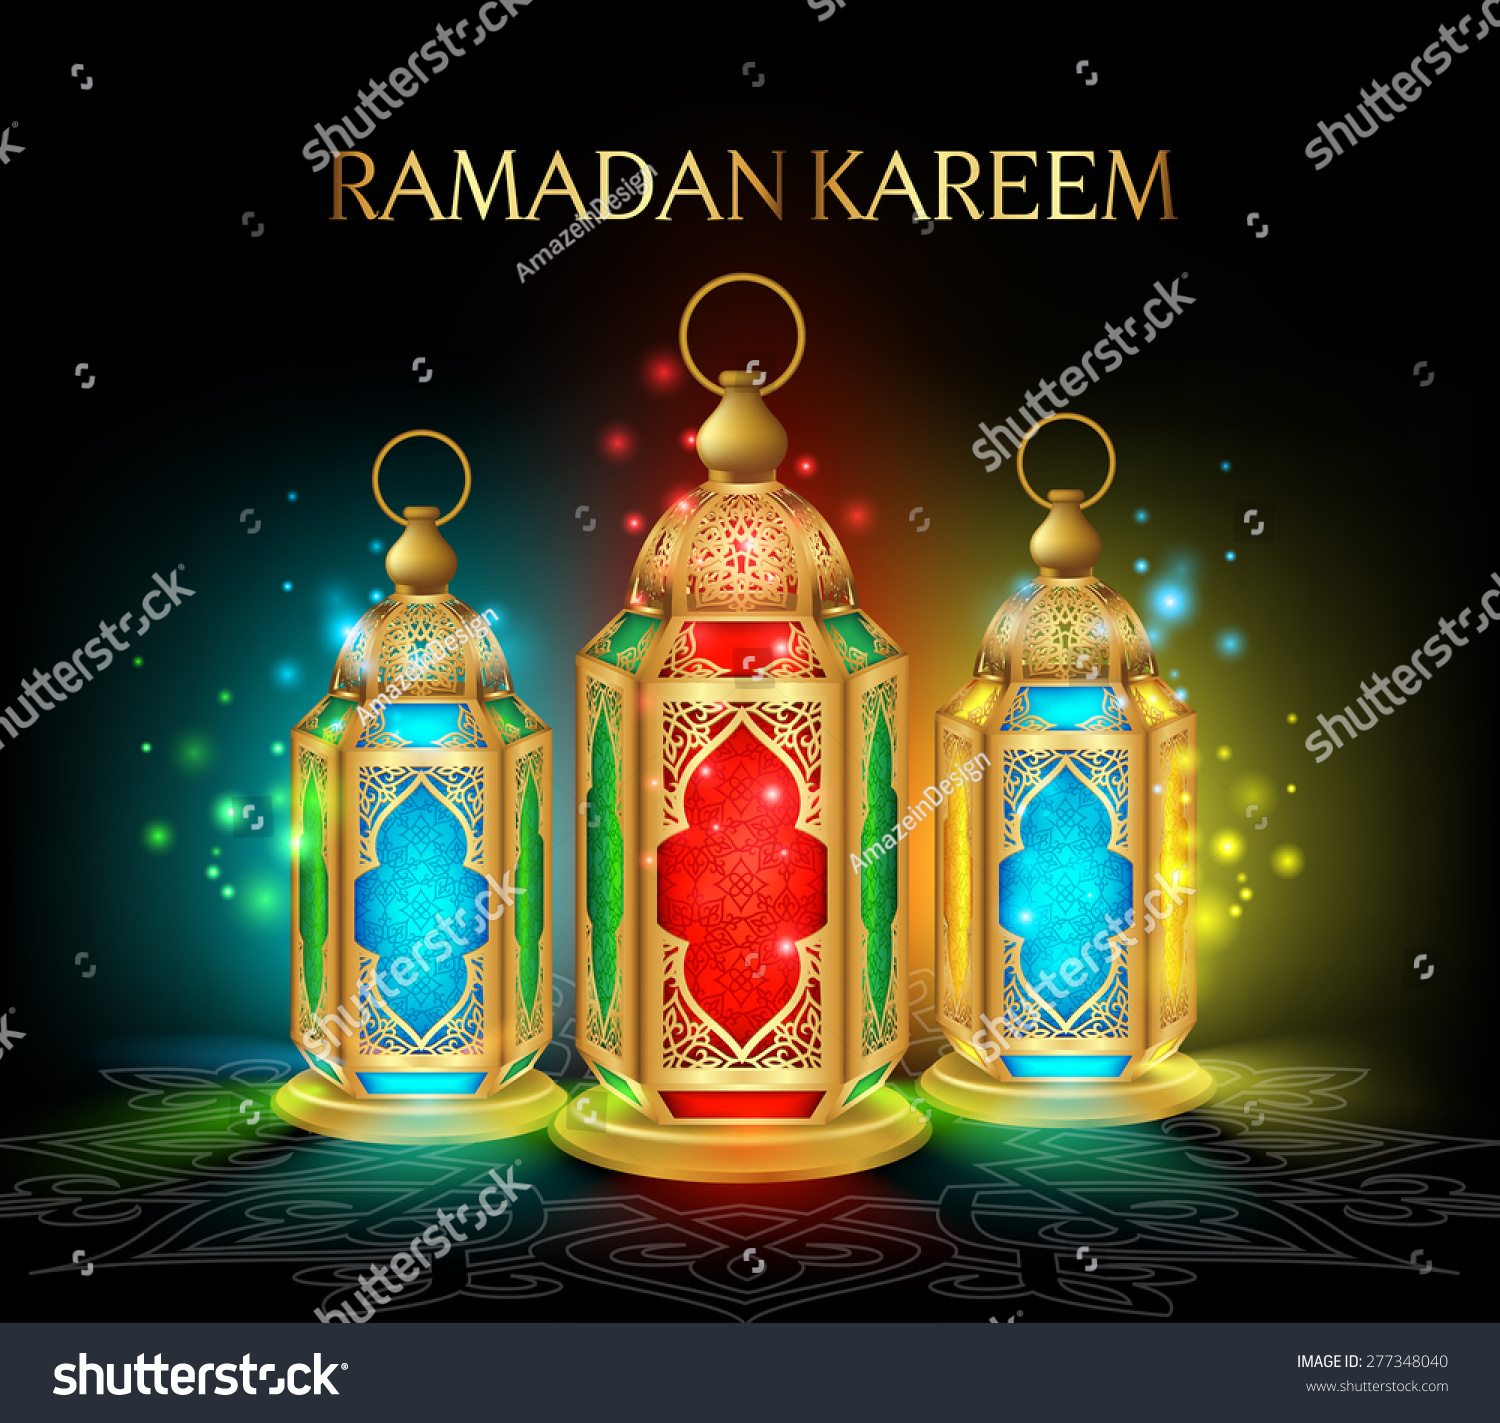 Beautiful Elegant Ramadan Kareem Lantern or Fanous in Gold With Colorful Lights in Night Background for the Holy Month Occasion of fasting. Editable Vector Illustration #277348040